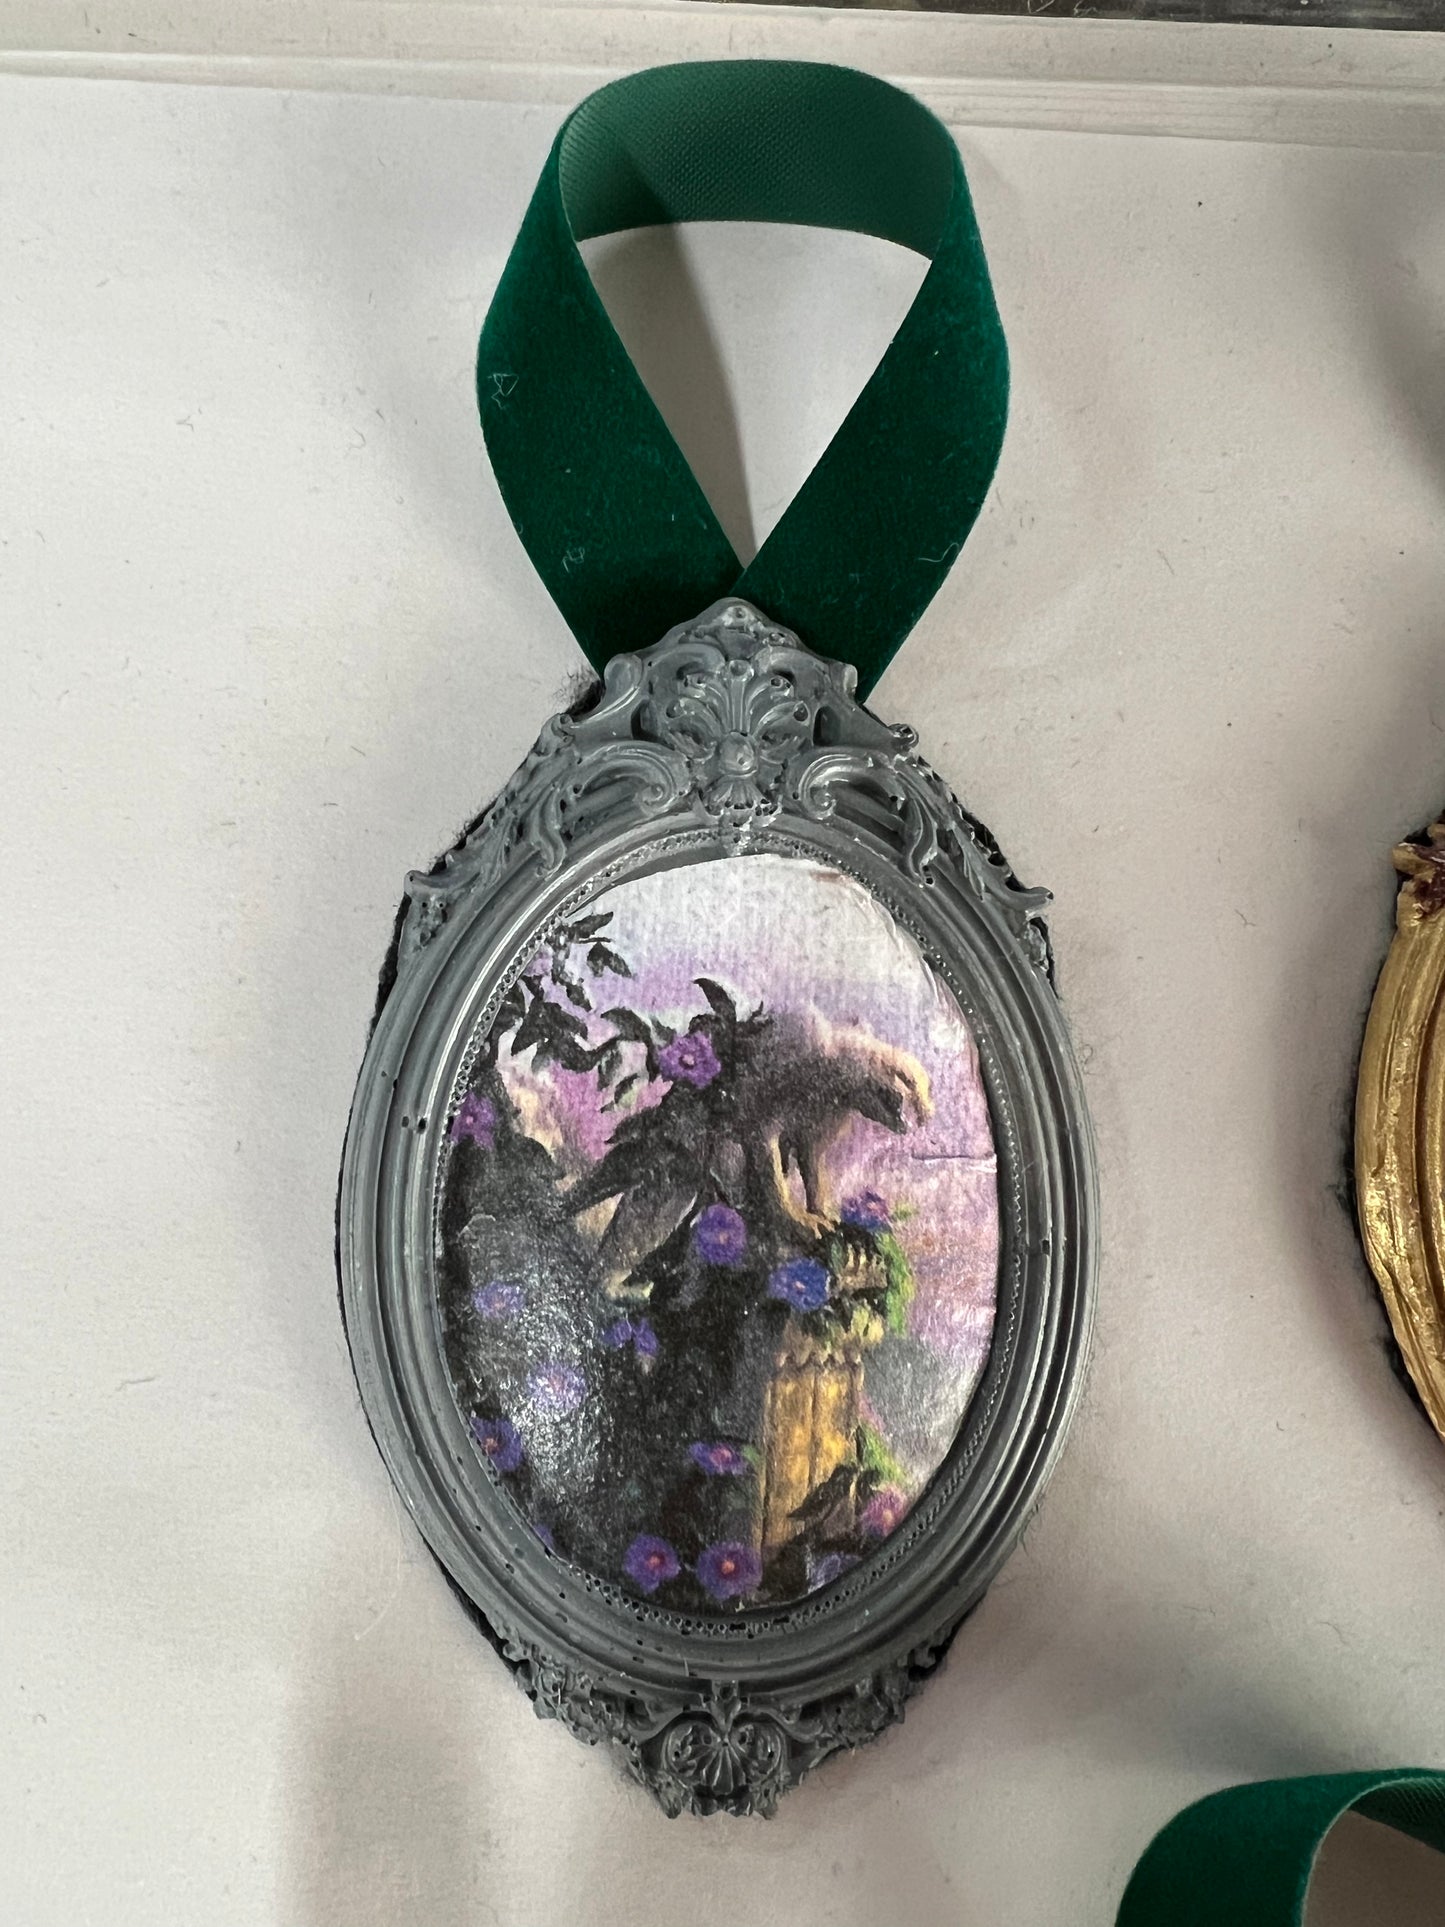 Handcrafted "Beauty and the Beast" inspired Ornaments